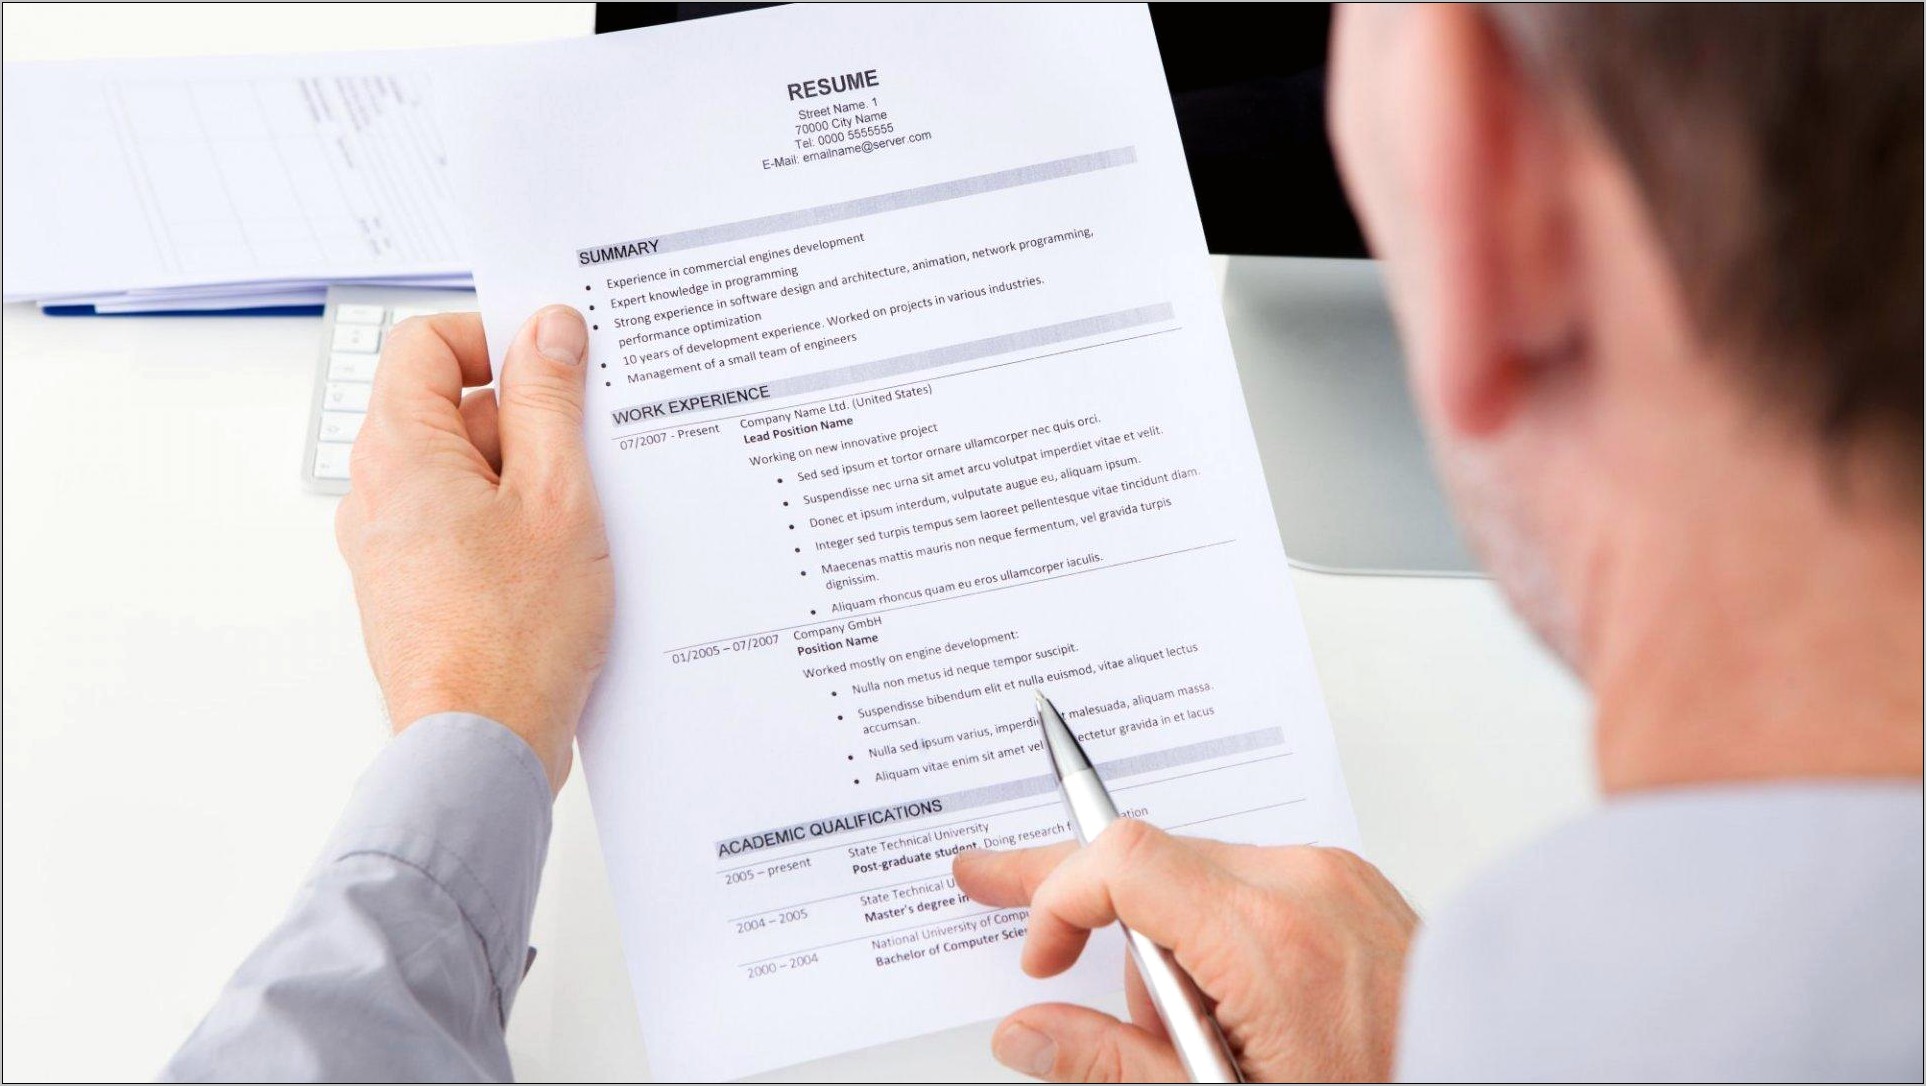 Should Your Resume Have 10 Years Experiences